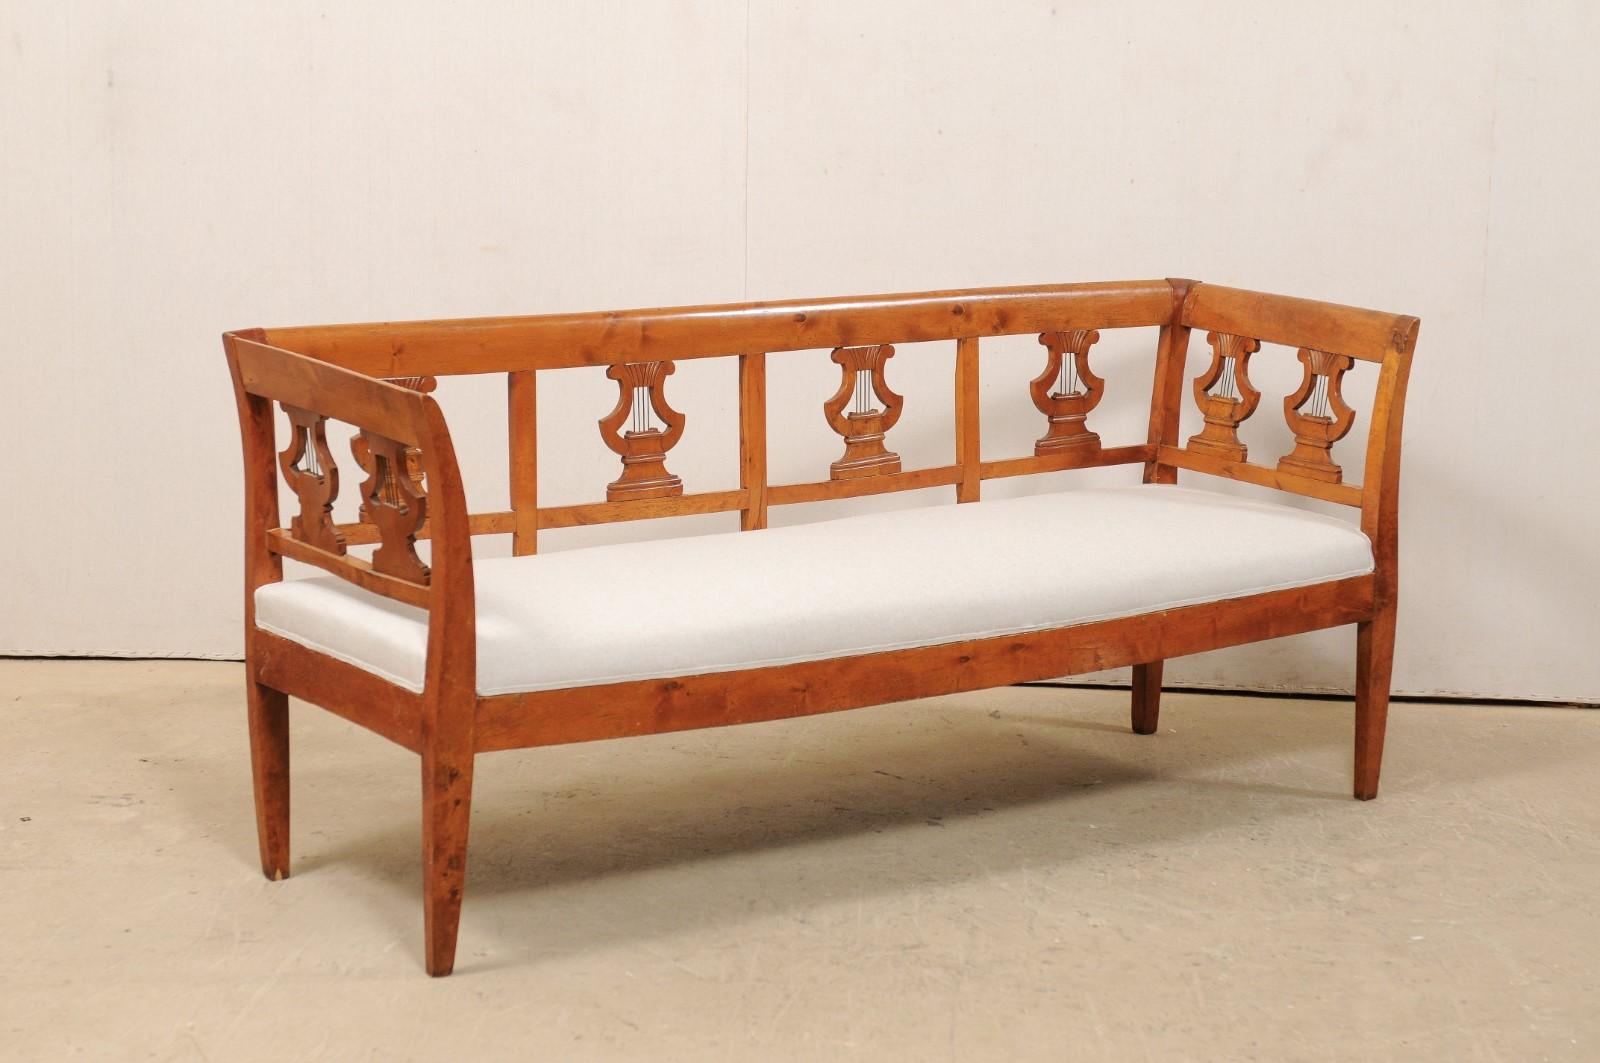 A Swedish neoclassical style carved Birchwood sofa bench from the mid-19th century. This antique settee from Sweden features a straight back rail atop a beautiful and widely spaced back splats of pierce-carved lyres (with metal pieces as cords). The